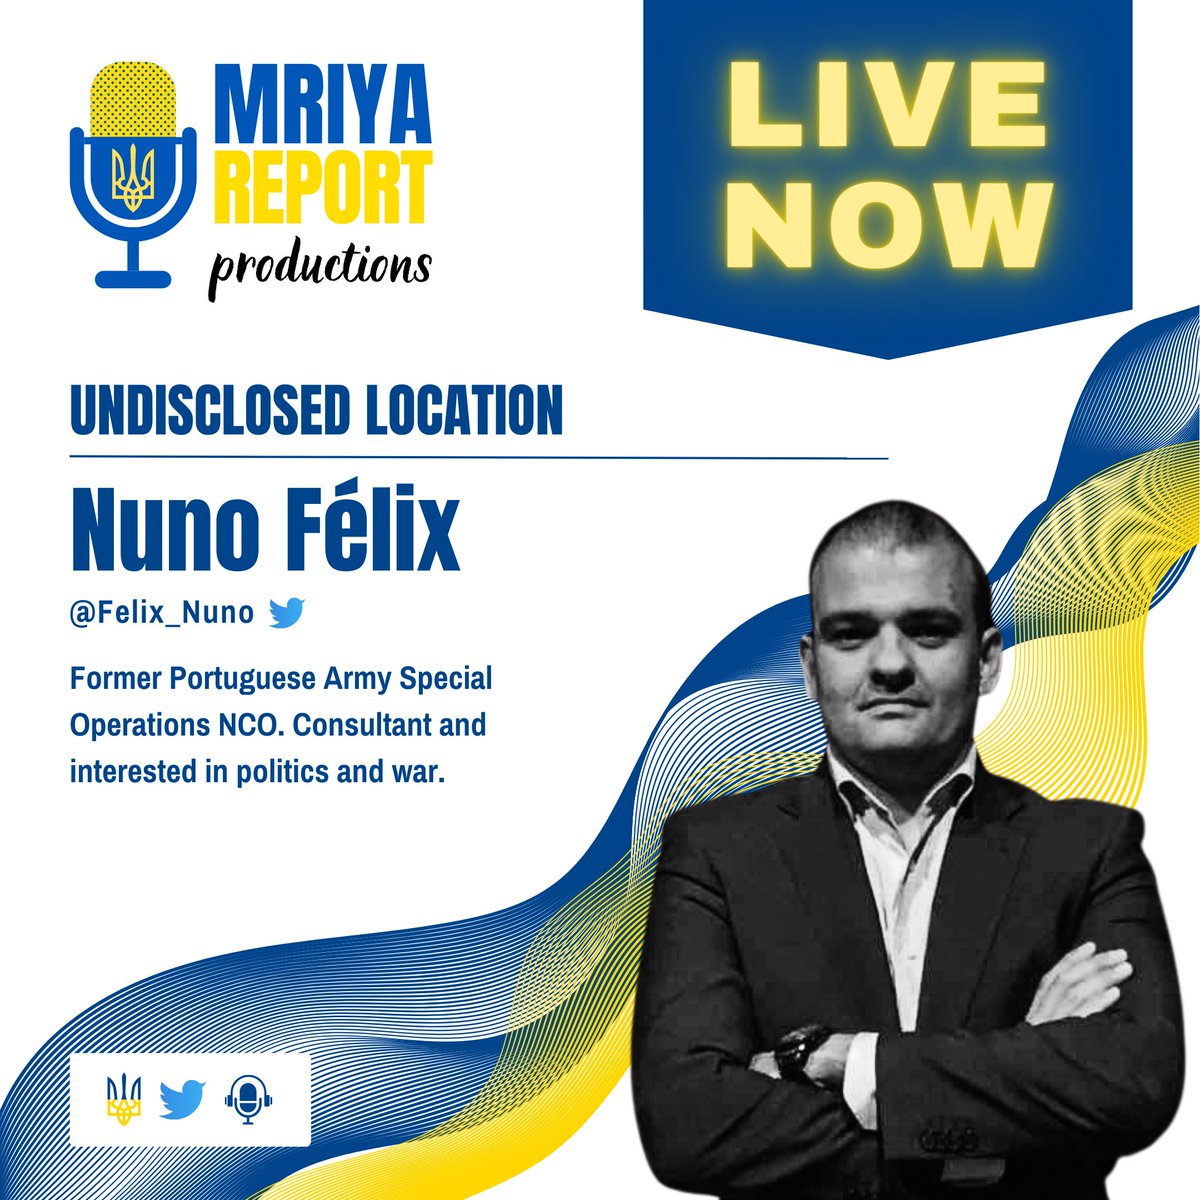 💥🇺🇦 LIVE NOW 🇺🇦💥
with Former Portuguese Army Special Operations NCO Nuno Félix for our weekly segment📍 𝗨𝗻𝗱𝗶𝘀𝗰𝗹𝗼𝘀𝗲𝗱 𝗟𝗼𝗰𝗮𝘁𝗶𝗼𝗻 📍 #LIVE on the @MriyaReport! Come join us & bring your questions 🎙️@Felix_Nuno

#CounterOffensive #MriyaReport #Ukraine #F16 #Kyiv